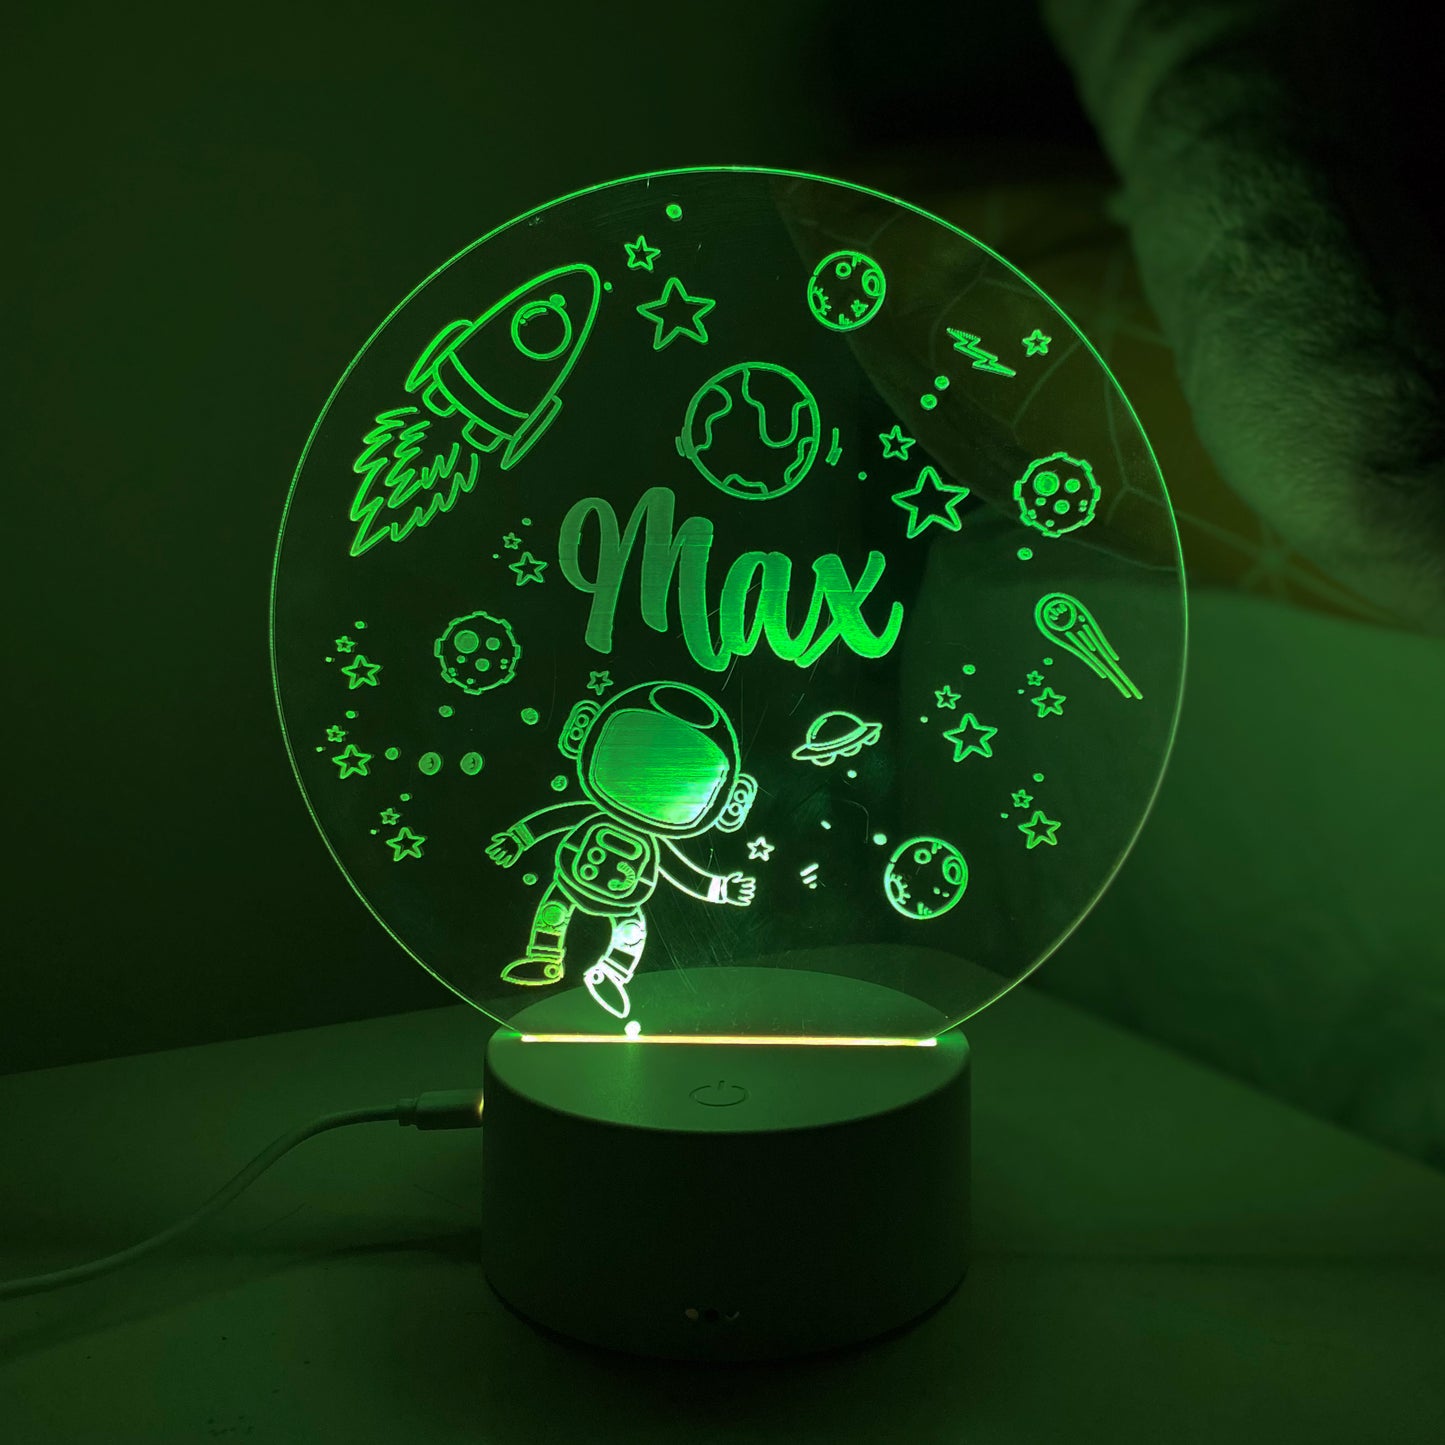 Personalised LED Space Theme Night Light